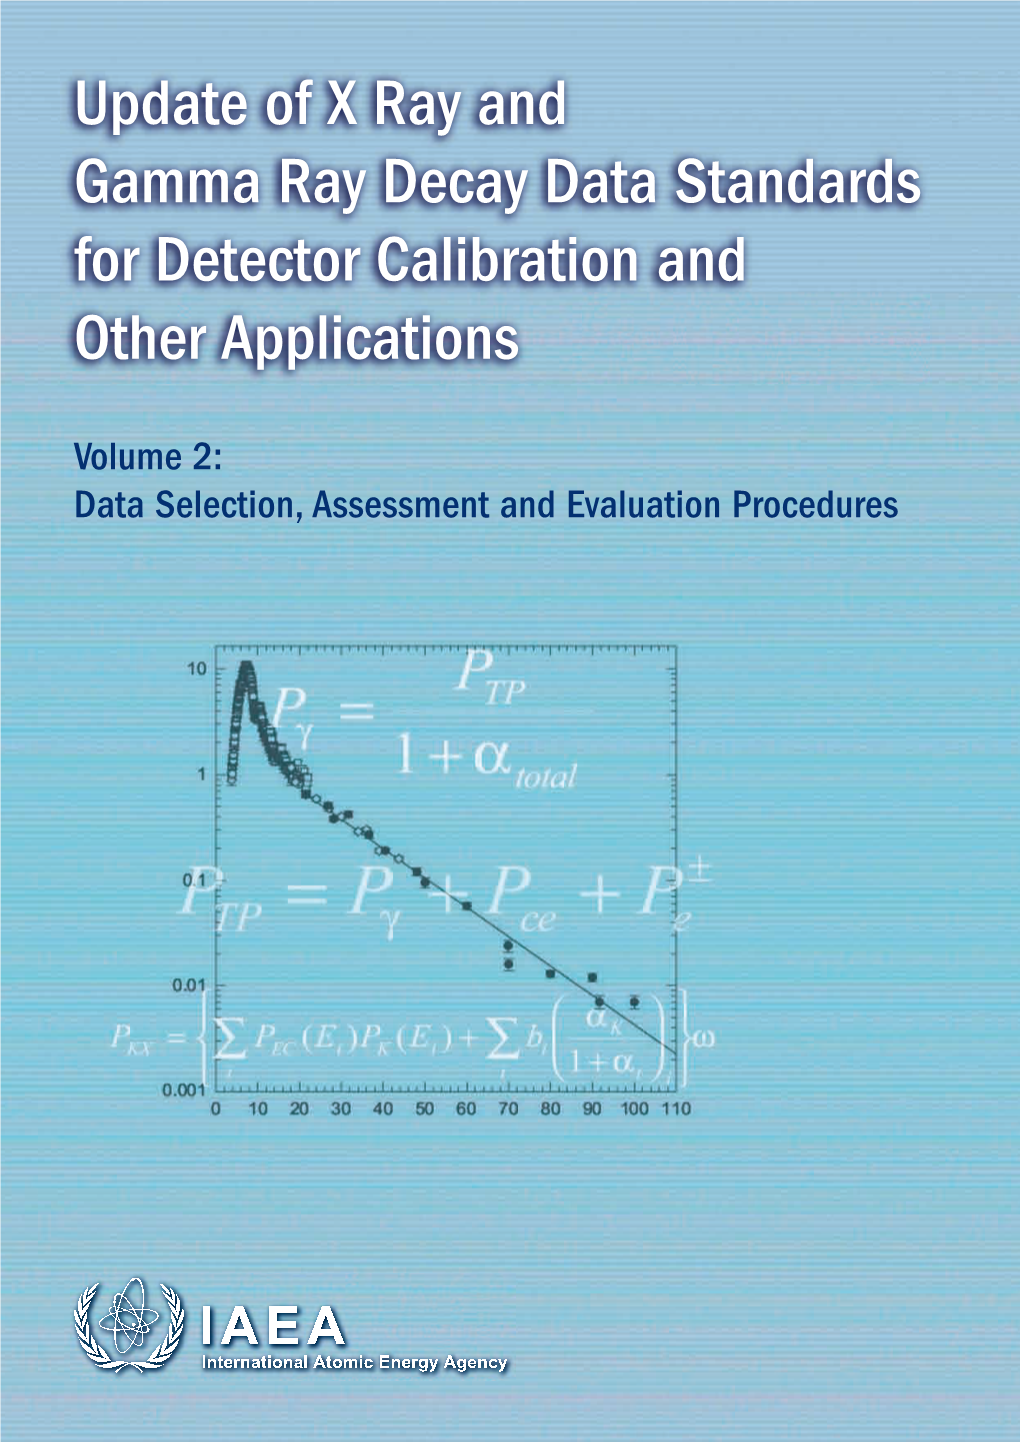 Update of X Ray and Gamma Ray Decay Data Standards for Detector Calibration and Other Applications